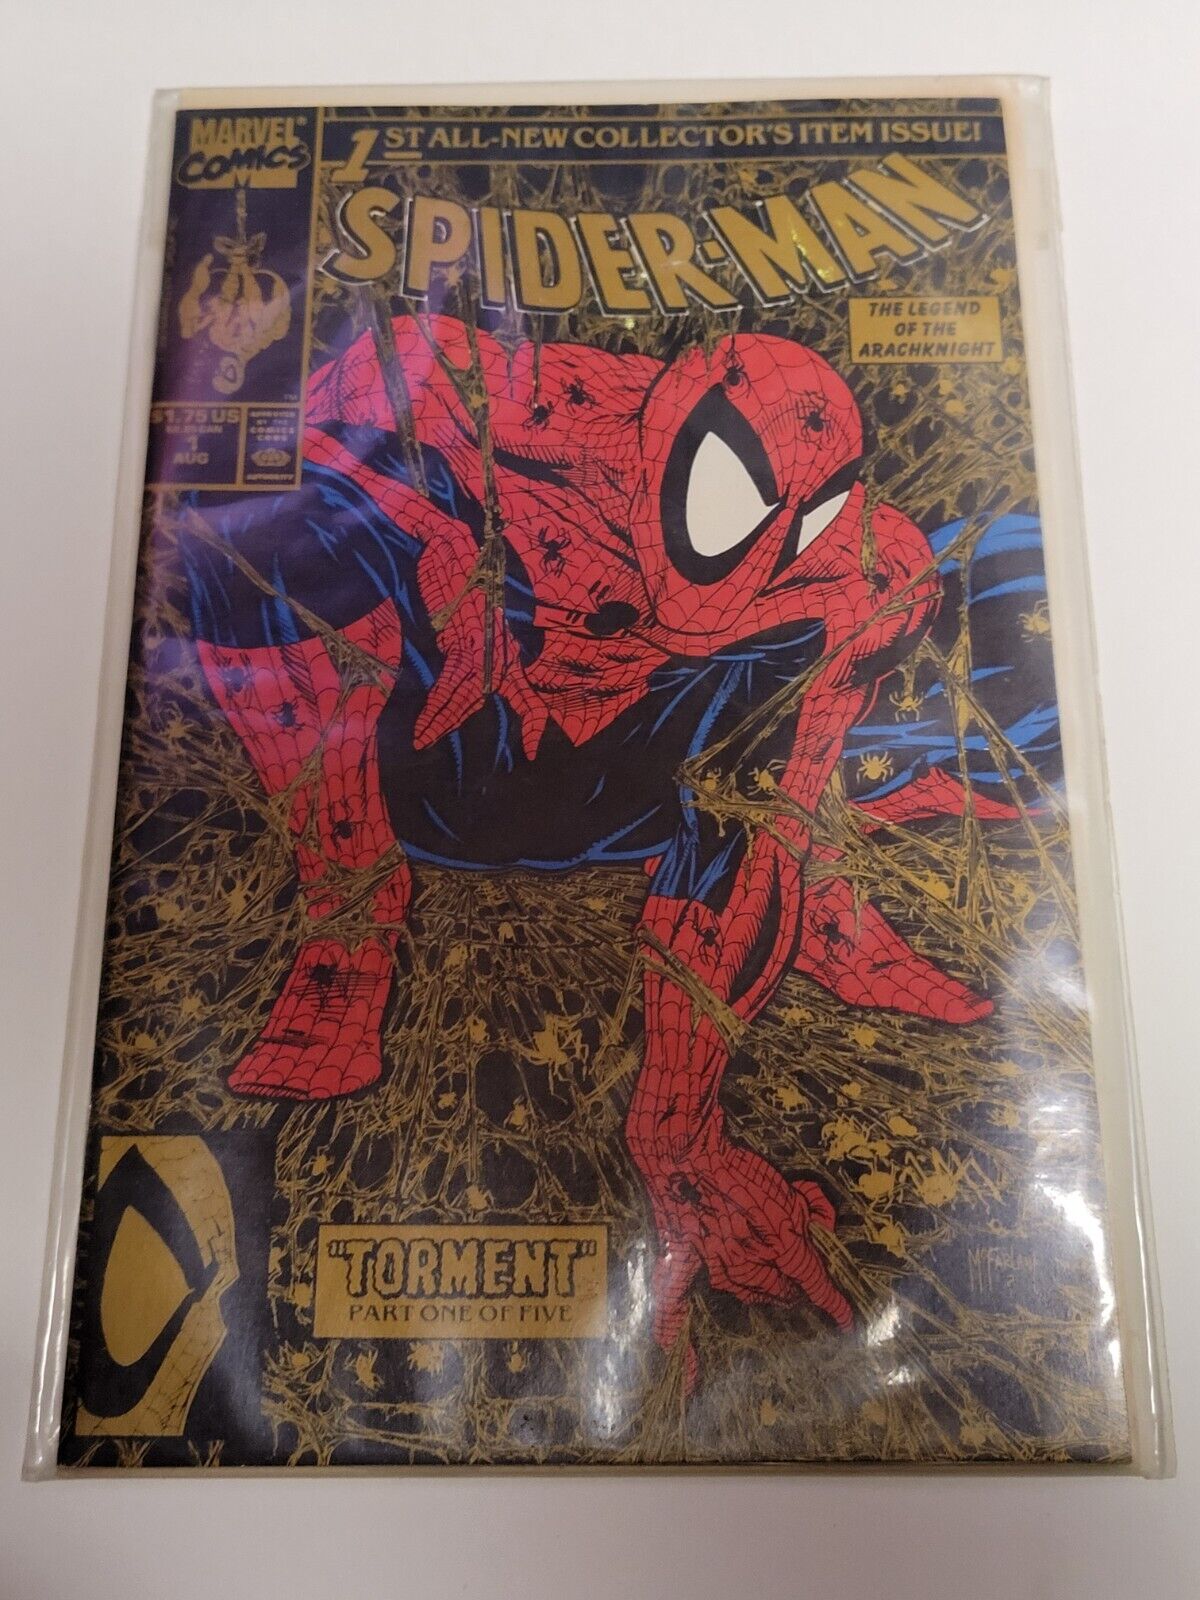 Spider Man - Five Issues - #1 #2 #3 #4 #5 - Torment - 1990 - Todd McFarlane